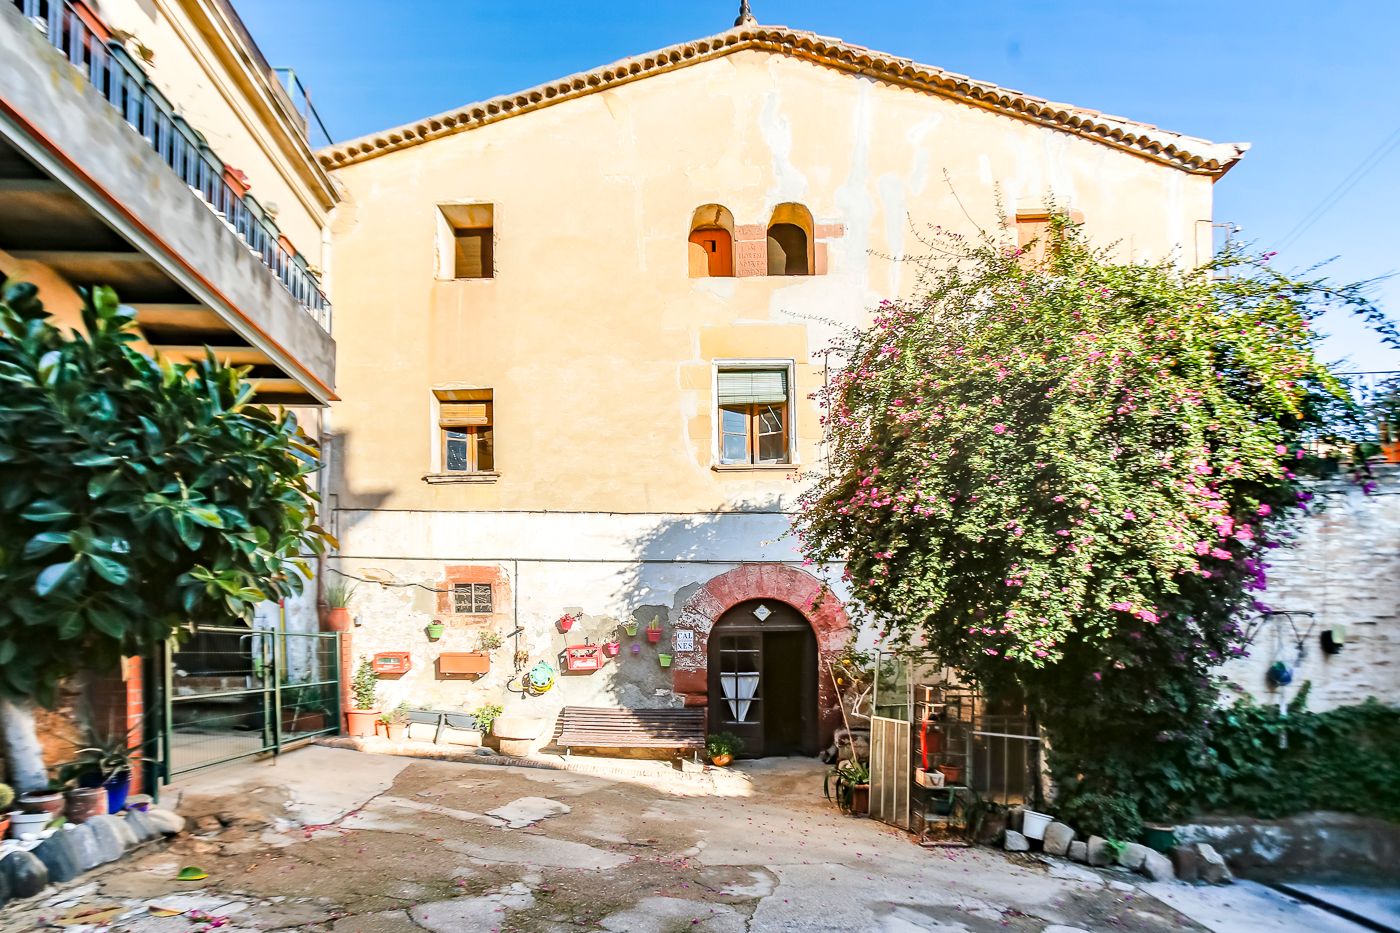 Farmhouse for sale in the old town with the possibility of segregating into several homes or obtaining a hotel license